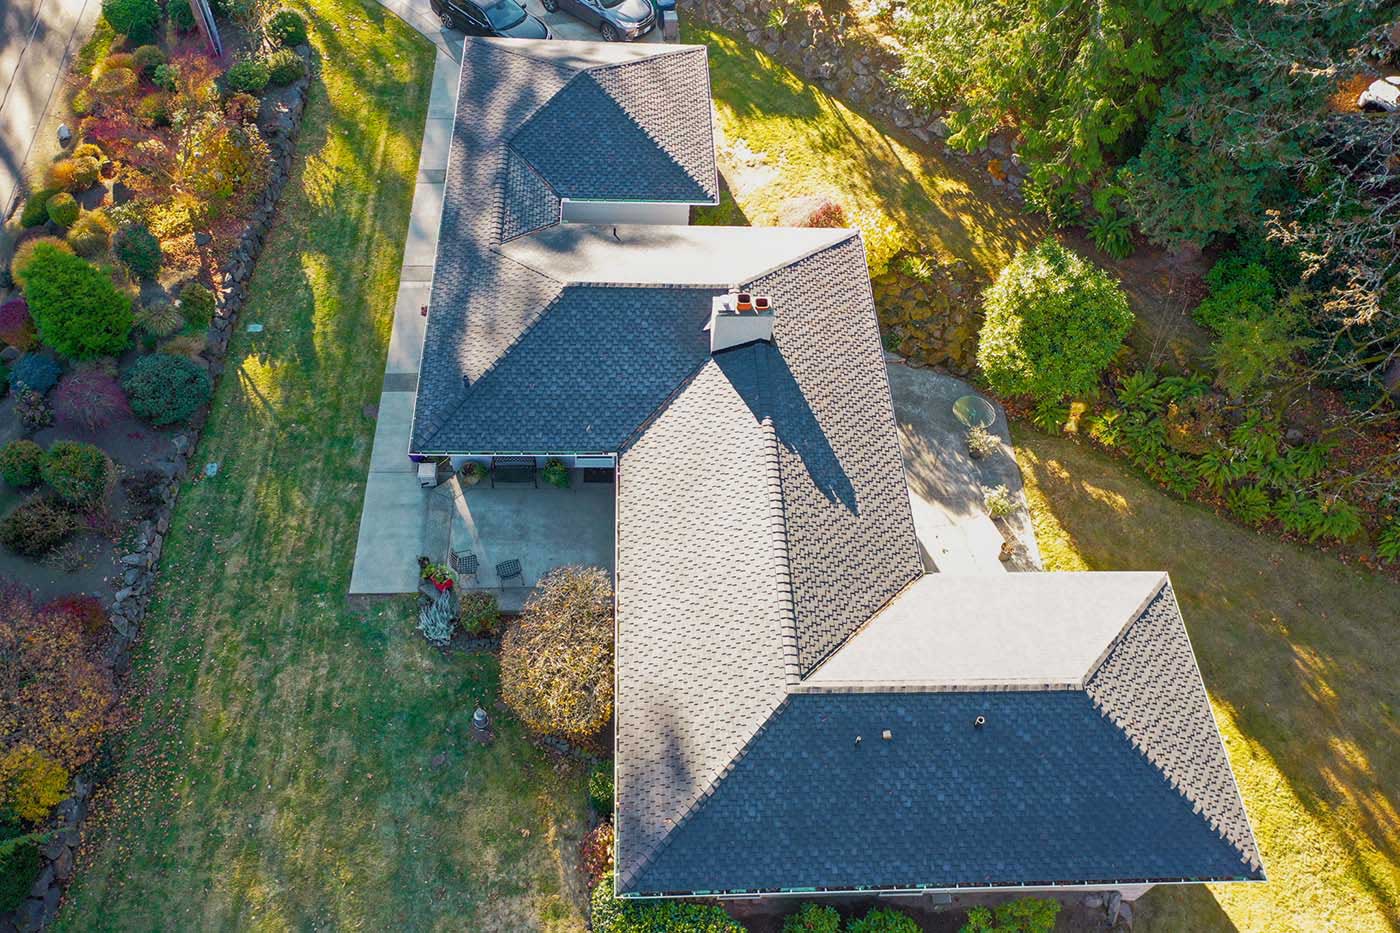 New Composite Asphalt Shingles Roof in Normandy Park, Washington: overhead view of roof from an angle